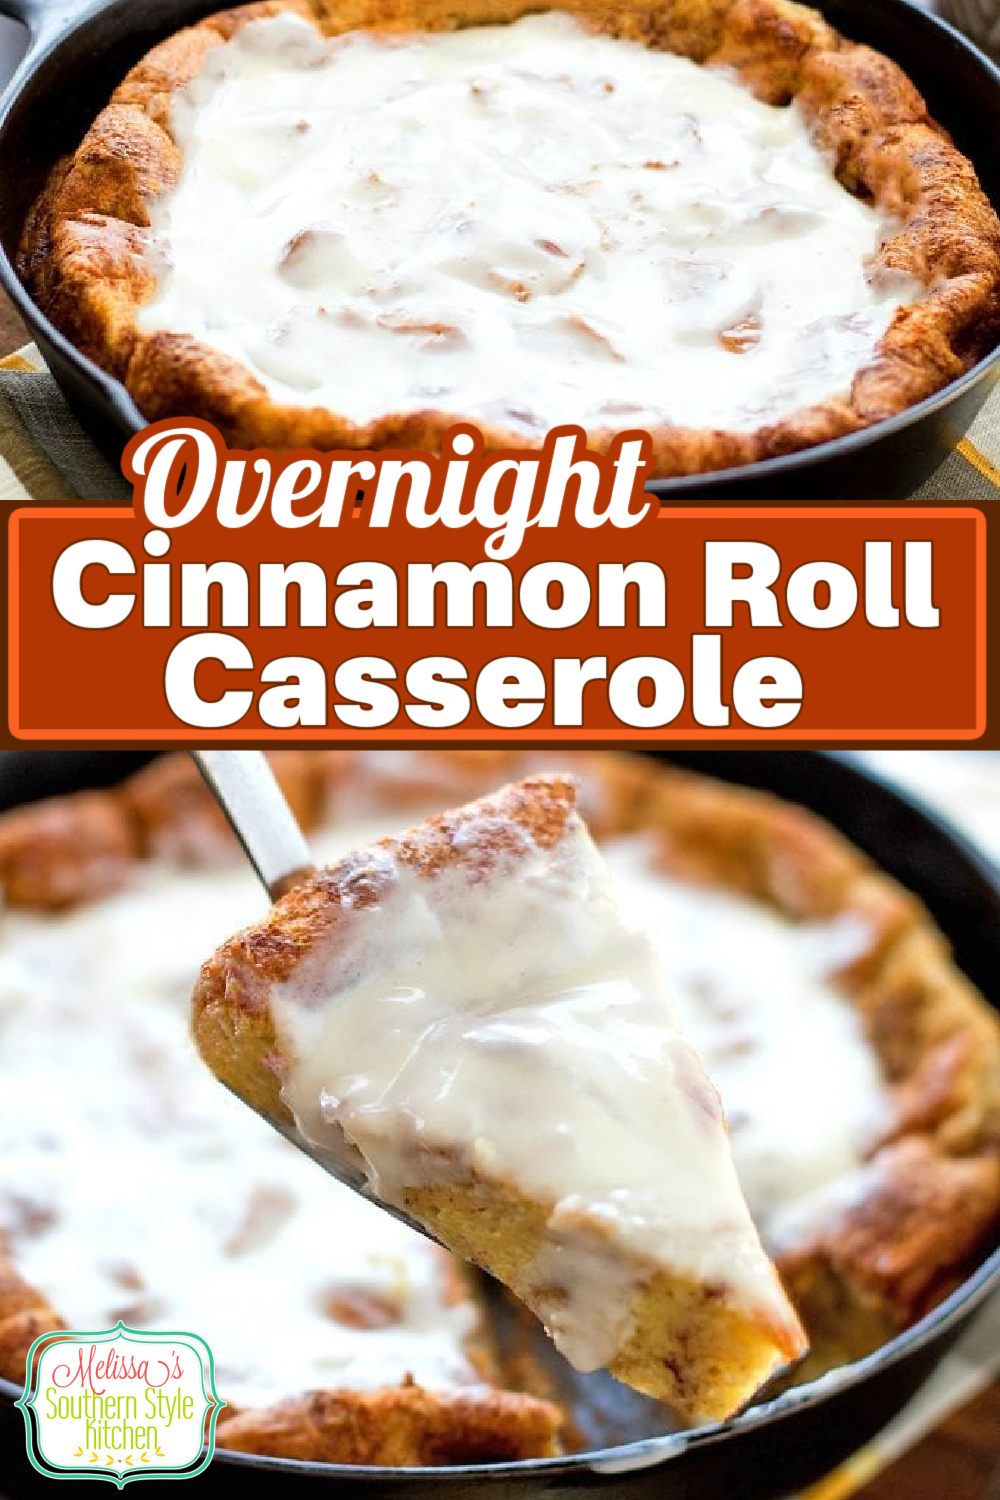 Make ahead Overnight Cinnamon Roll Casserole is perfect for weekend and holiday brunching or to kick start any day of the week #cinnamonrolls #cinnamonrollcasserole #easybrunchrecipes #makeaheadbrunchrecipes #brunch #breakfast #christmasbrunch #easterbrunch #thanksigivng #mothersdaybrunch #cinnamonrollrecipes via @melissasssk